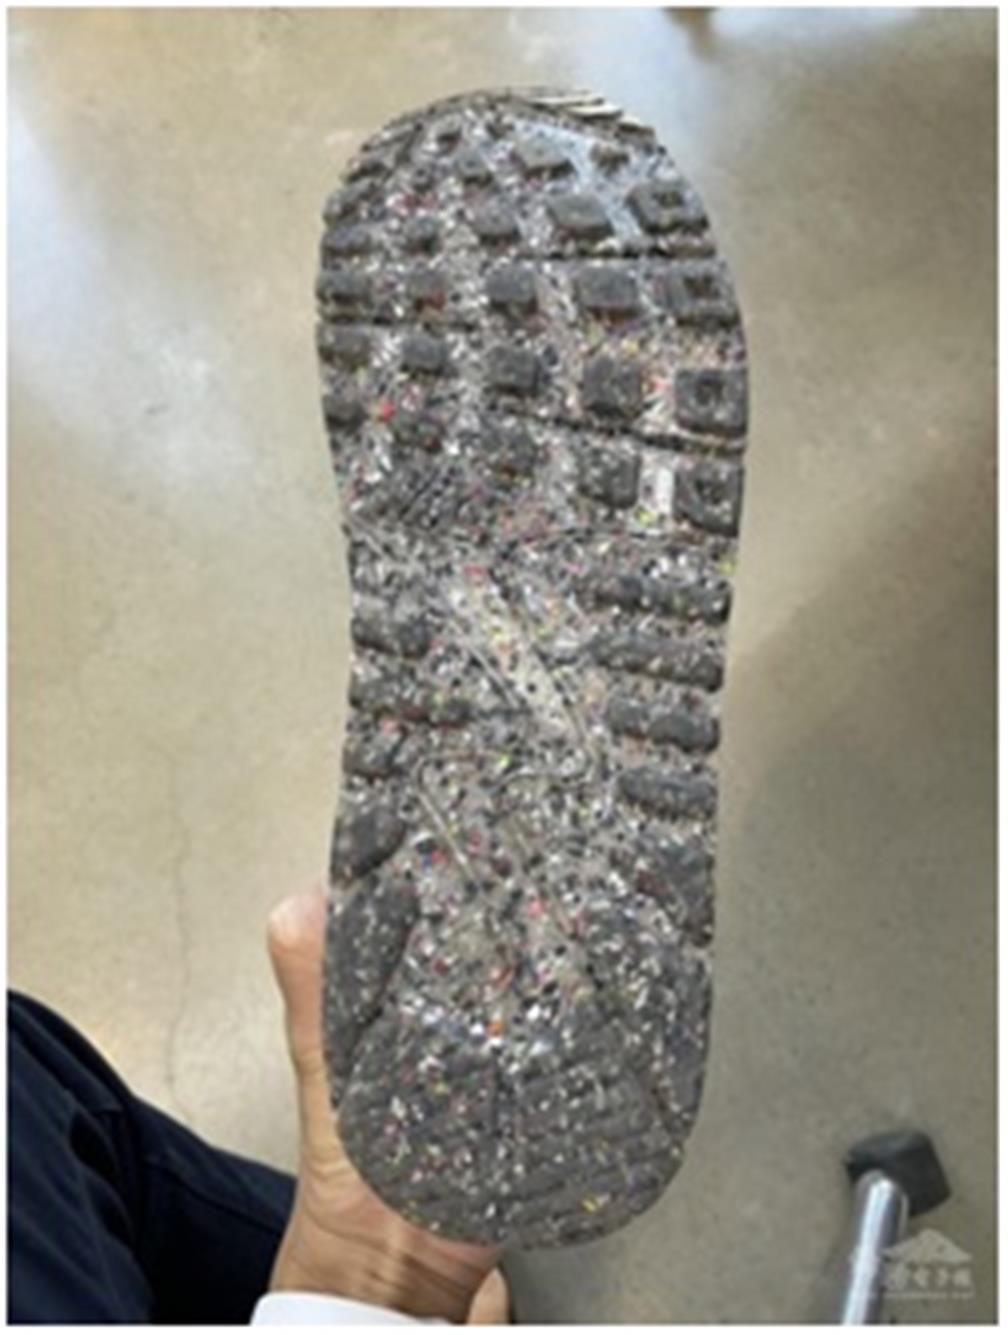 Shoe outsole made by Vietnam Force Tech